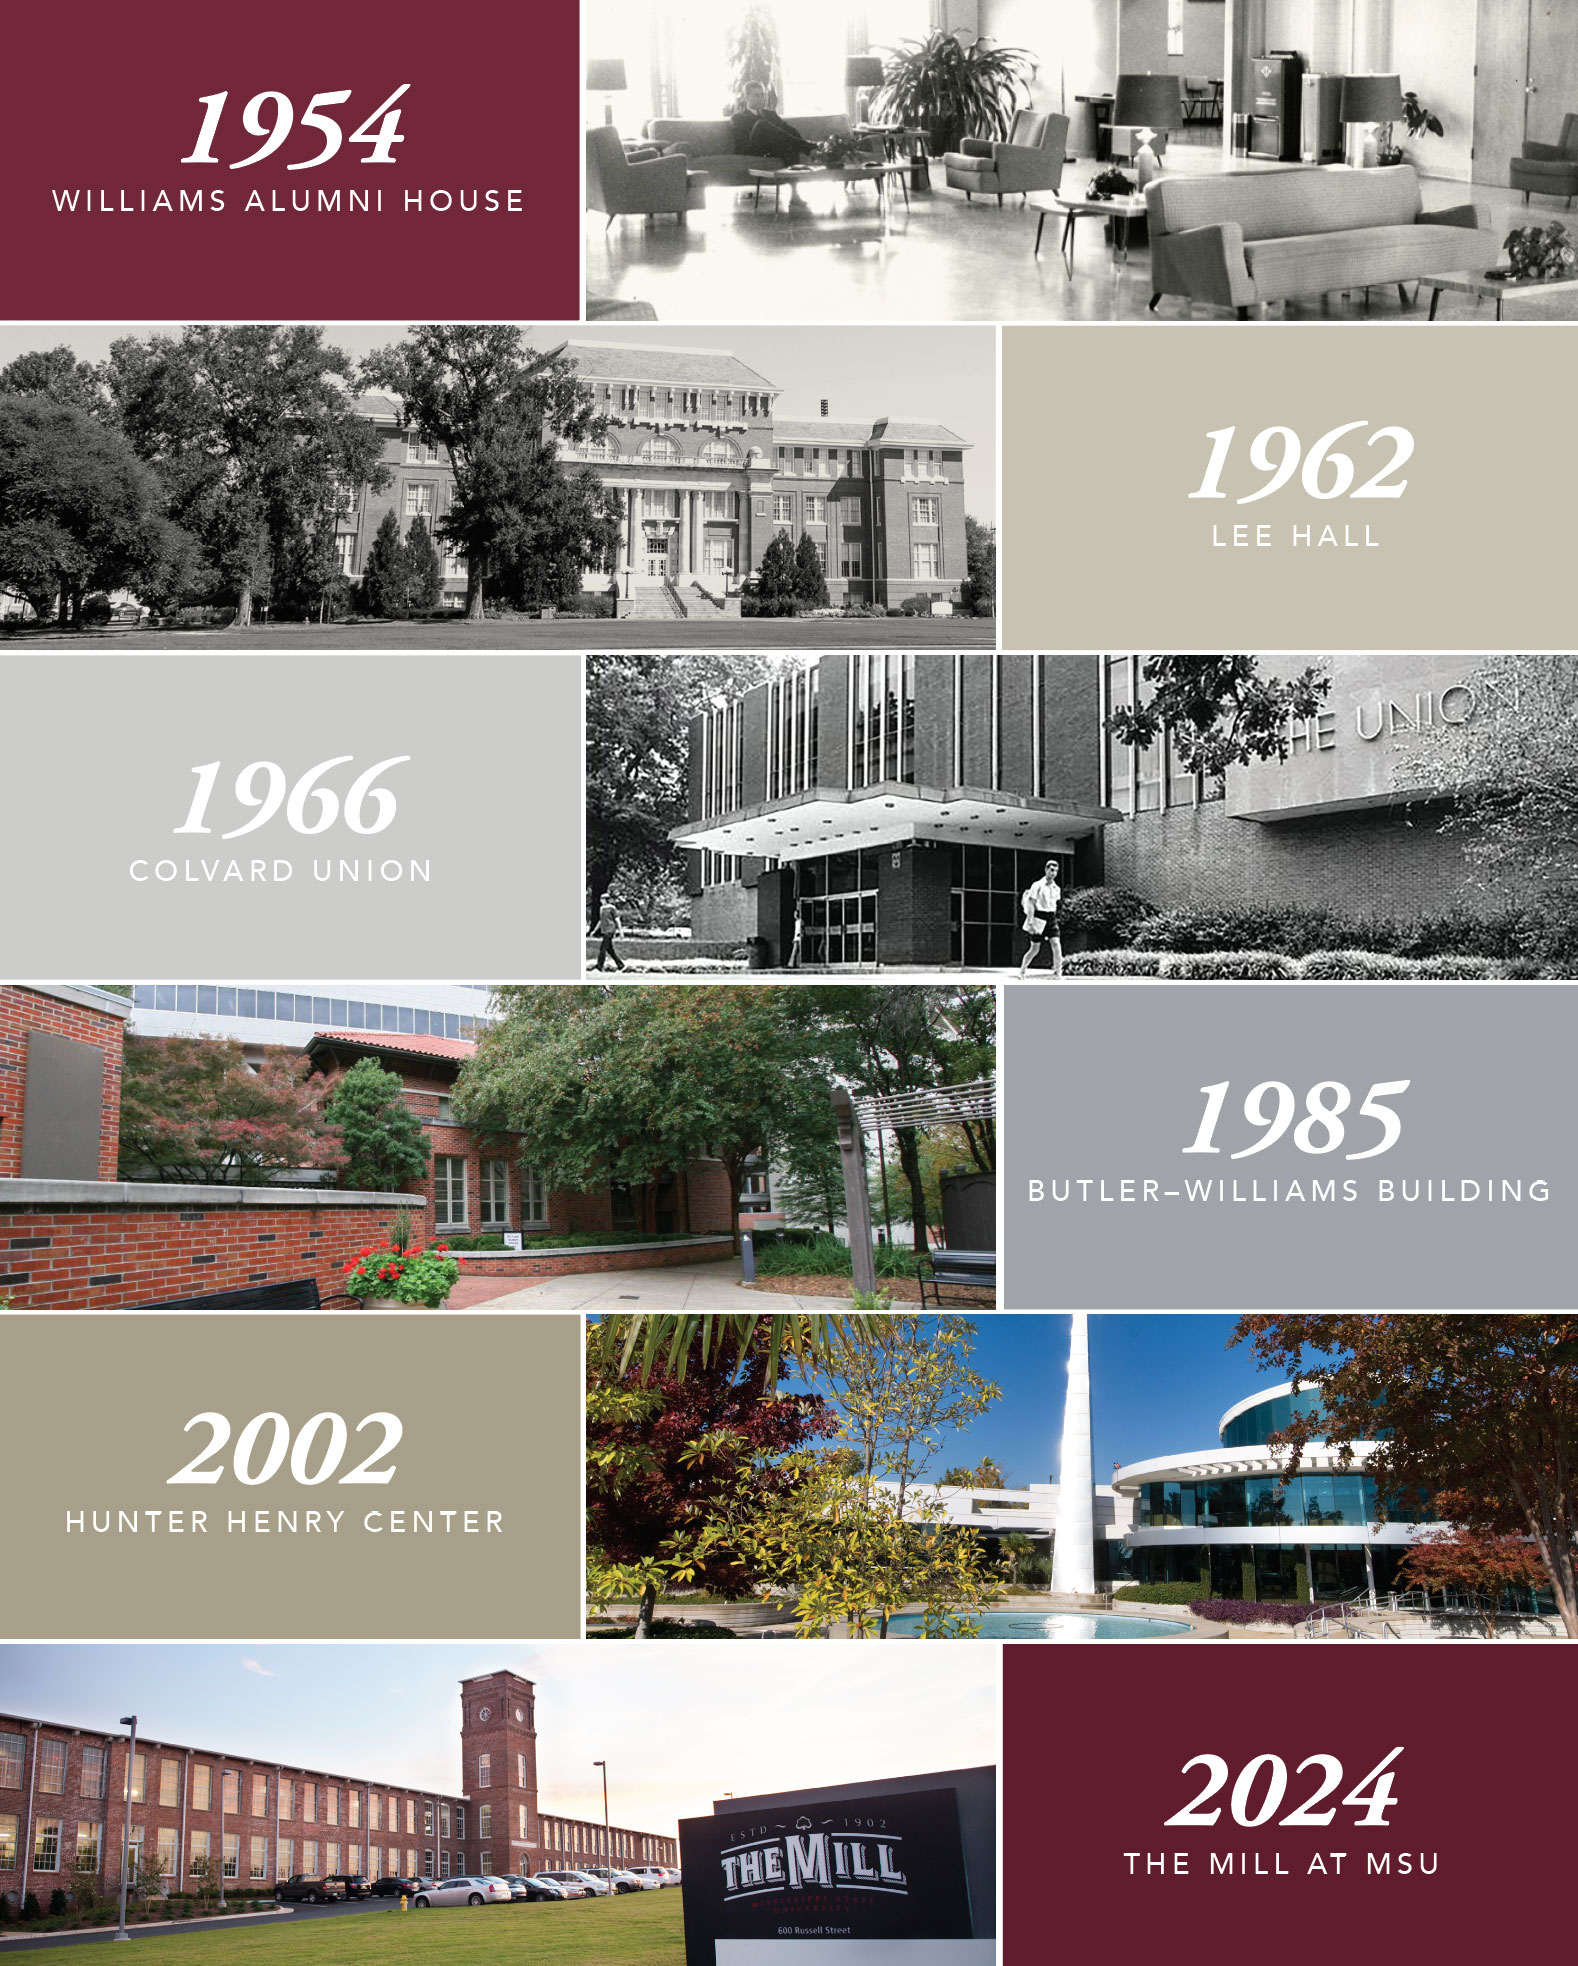 The history of the alumni association's locations